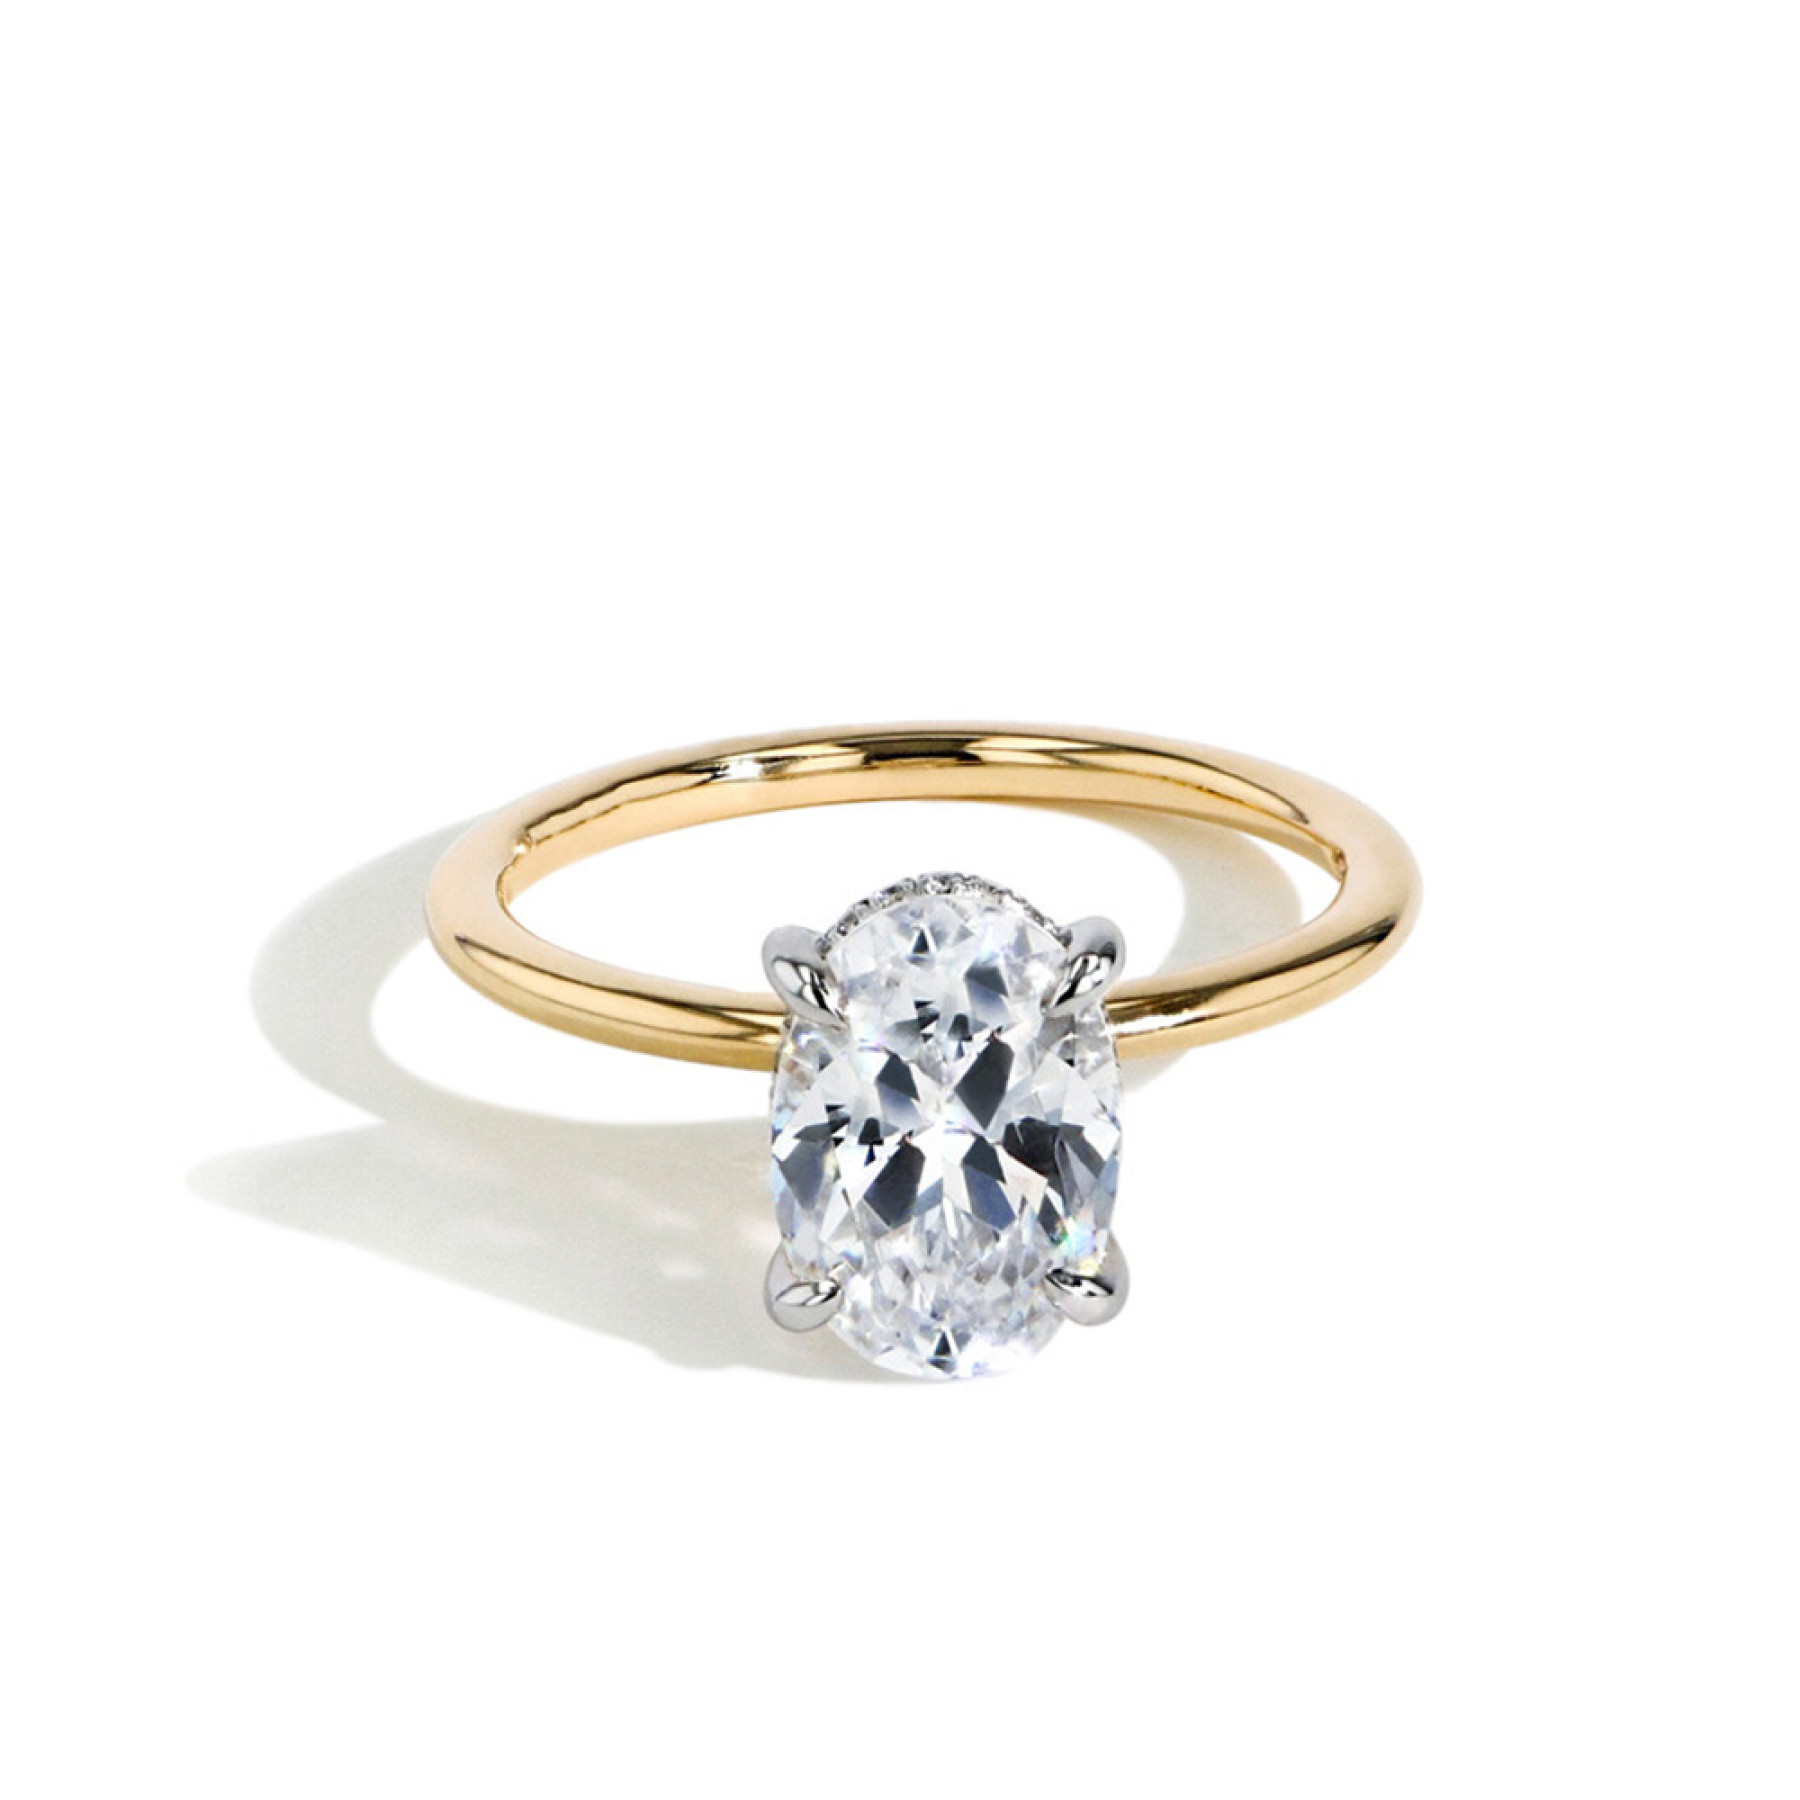 Minimalist Engagement Rings for Women, Thin Oval Solitaire